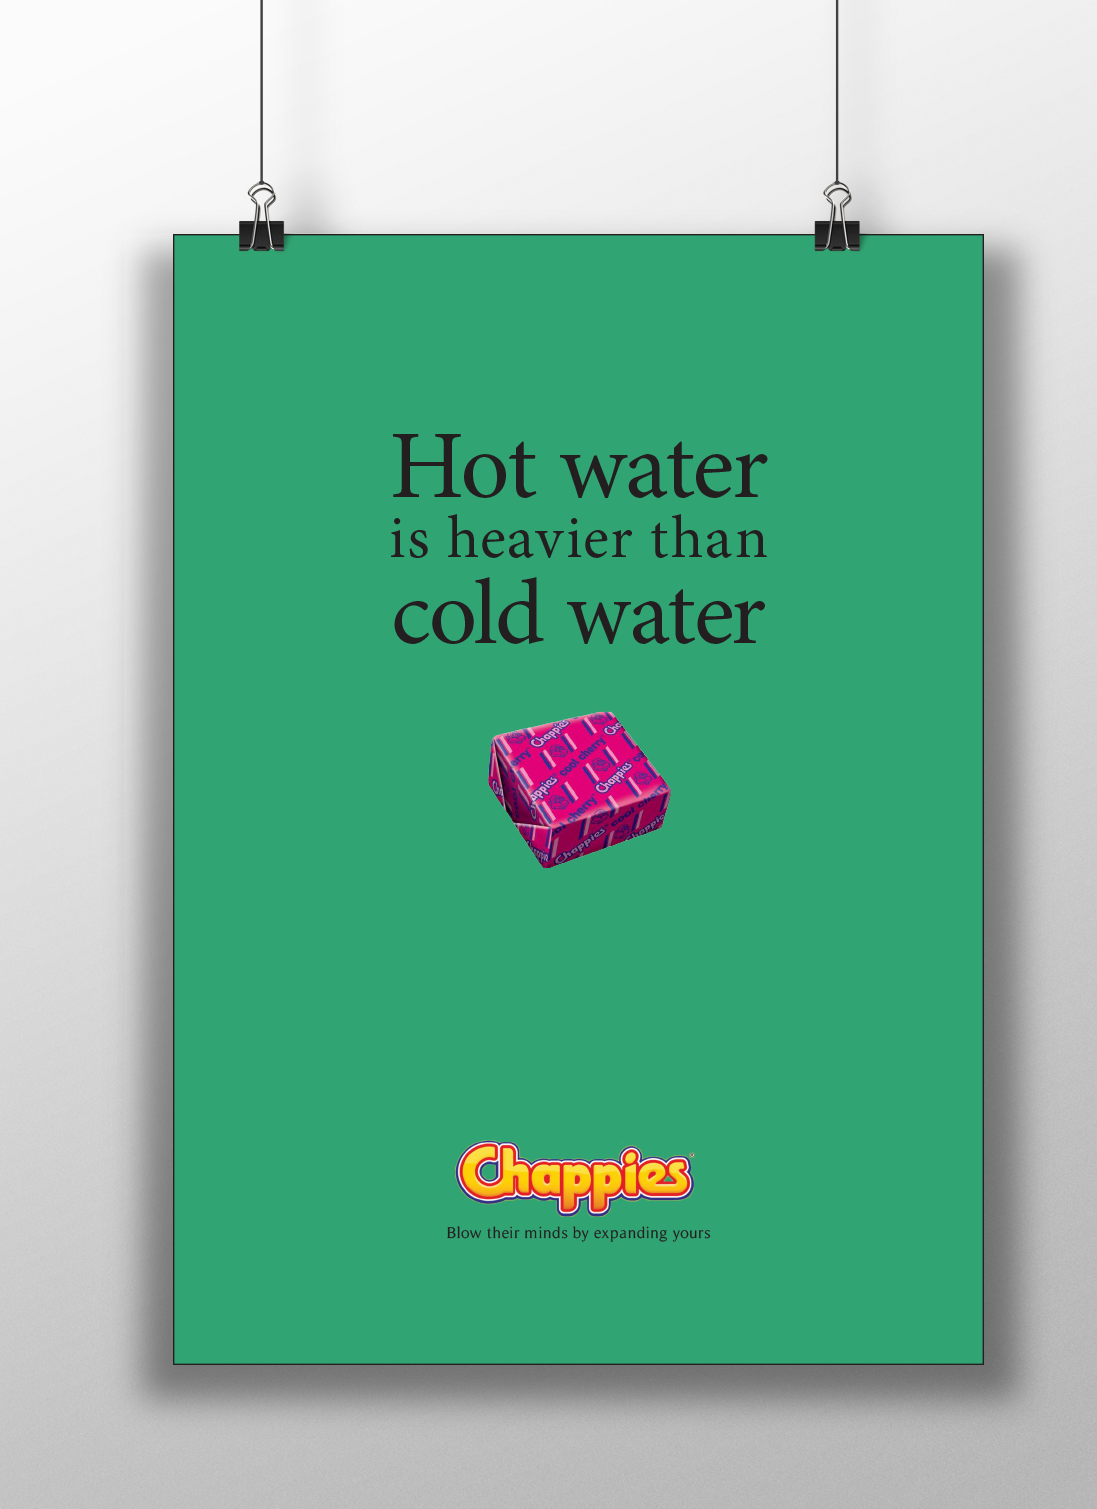 #chappies #bubblegum  #posters #Printad #magazine #ChewingGum #facts #Fact #artdirection